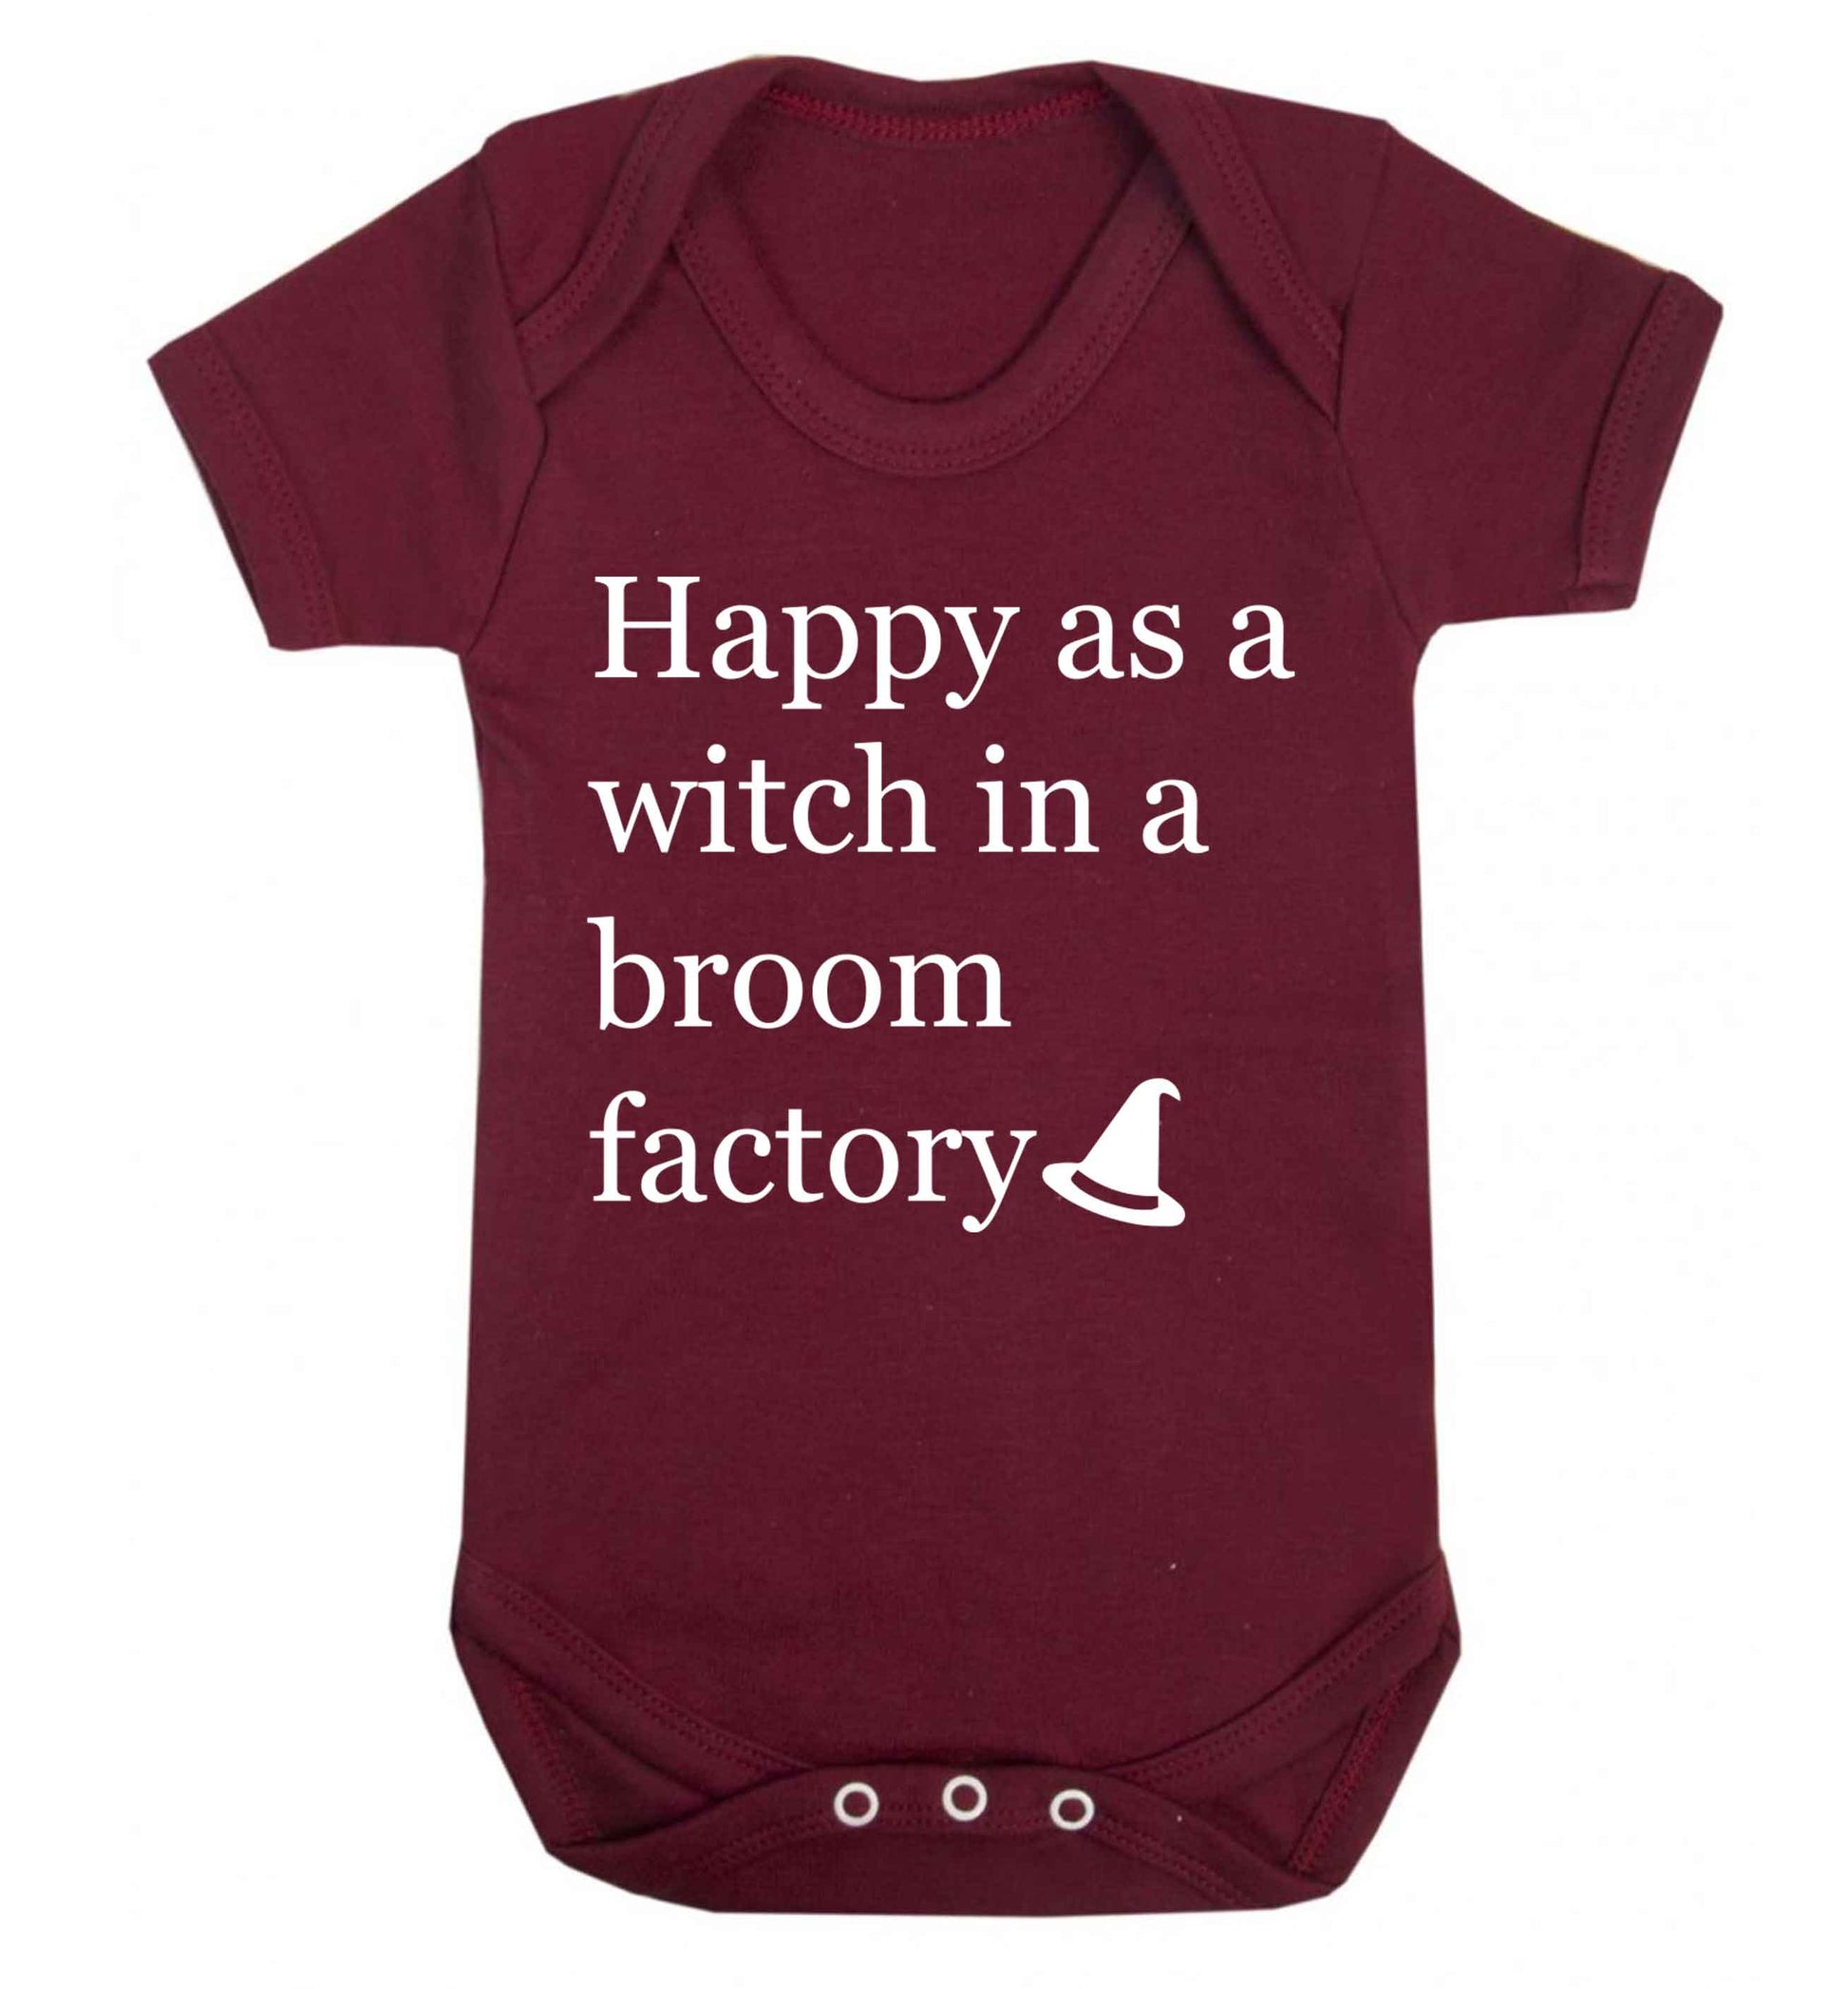 Happy as a witch in a broom factory Baby Vest maroon 18-24 months